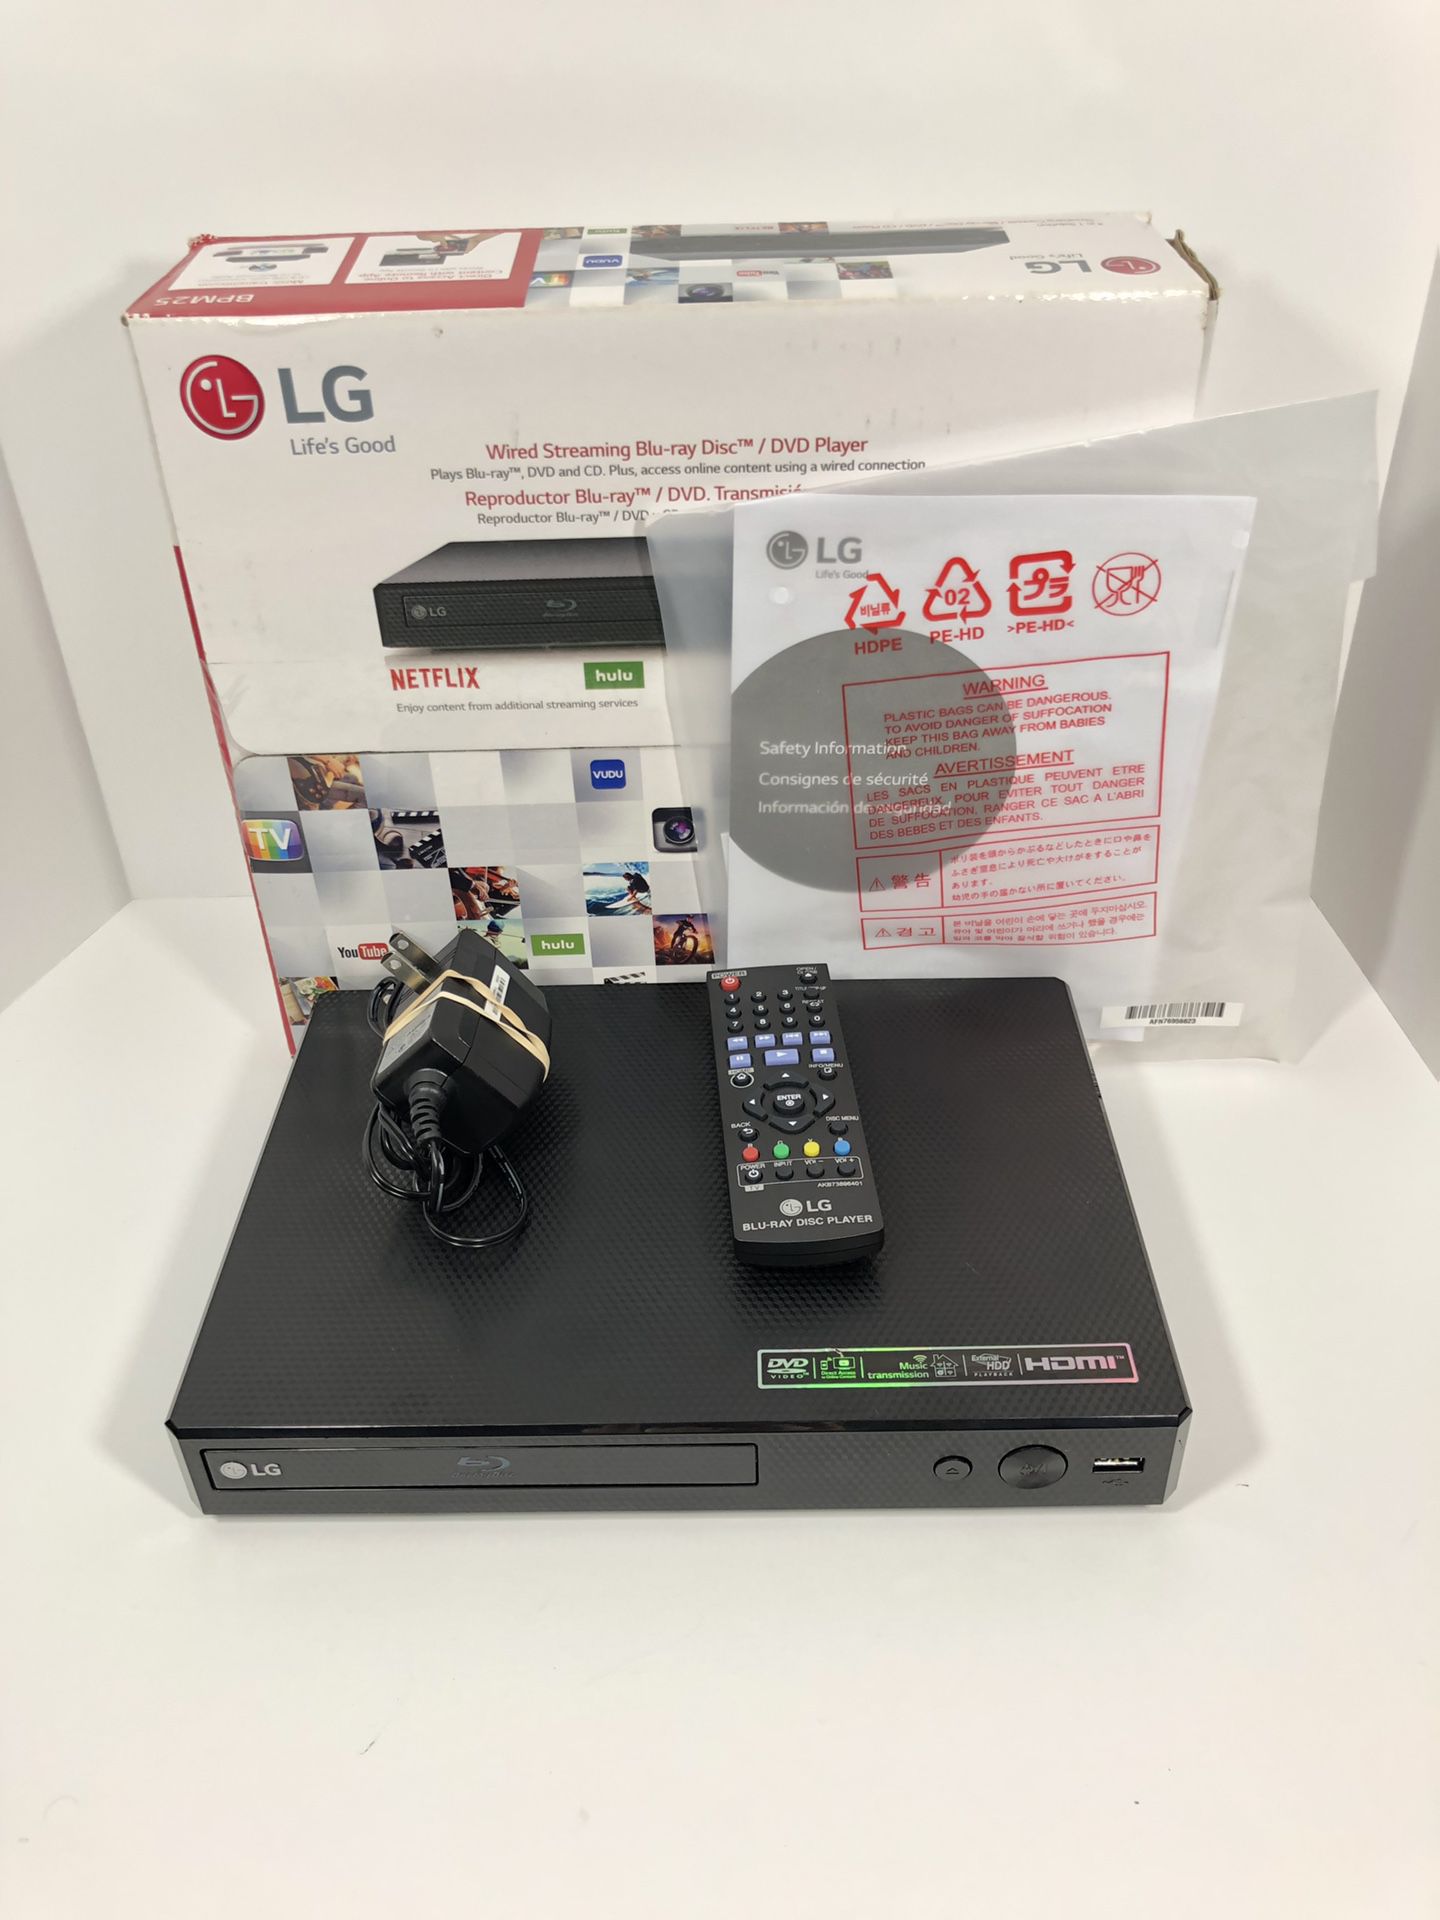 LG BPM25 Wired Streaming Blu-ray Disc DVD Player with Remote, Box, Manuals